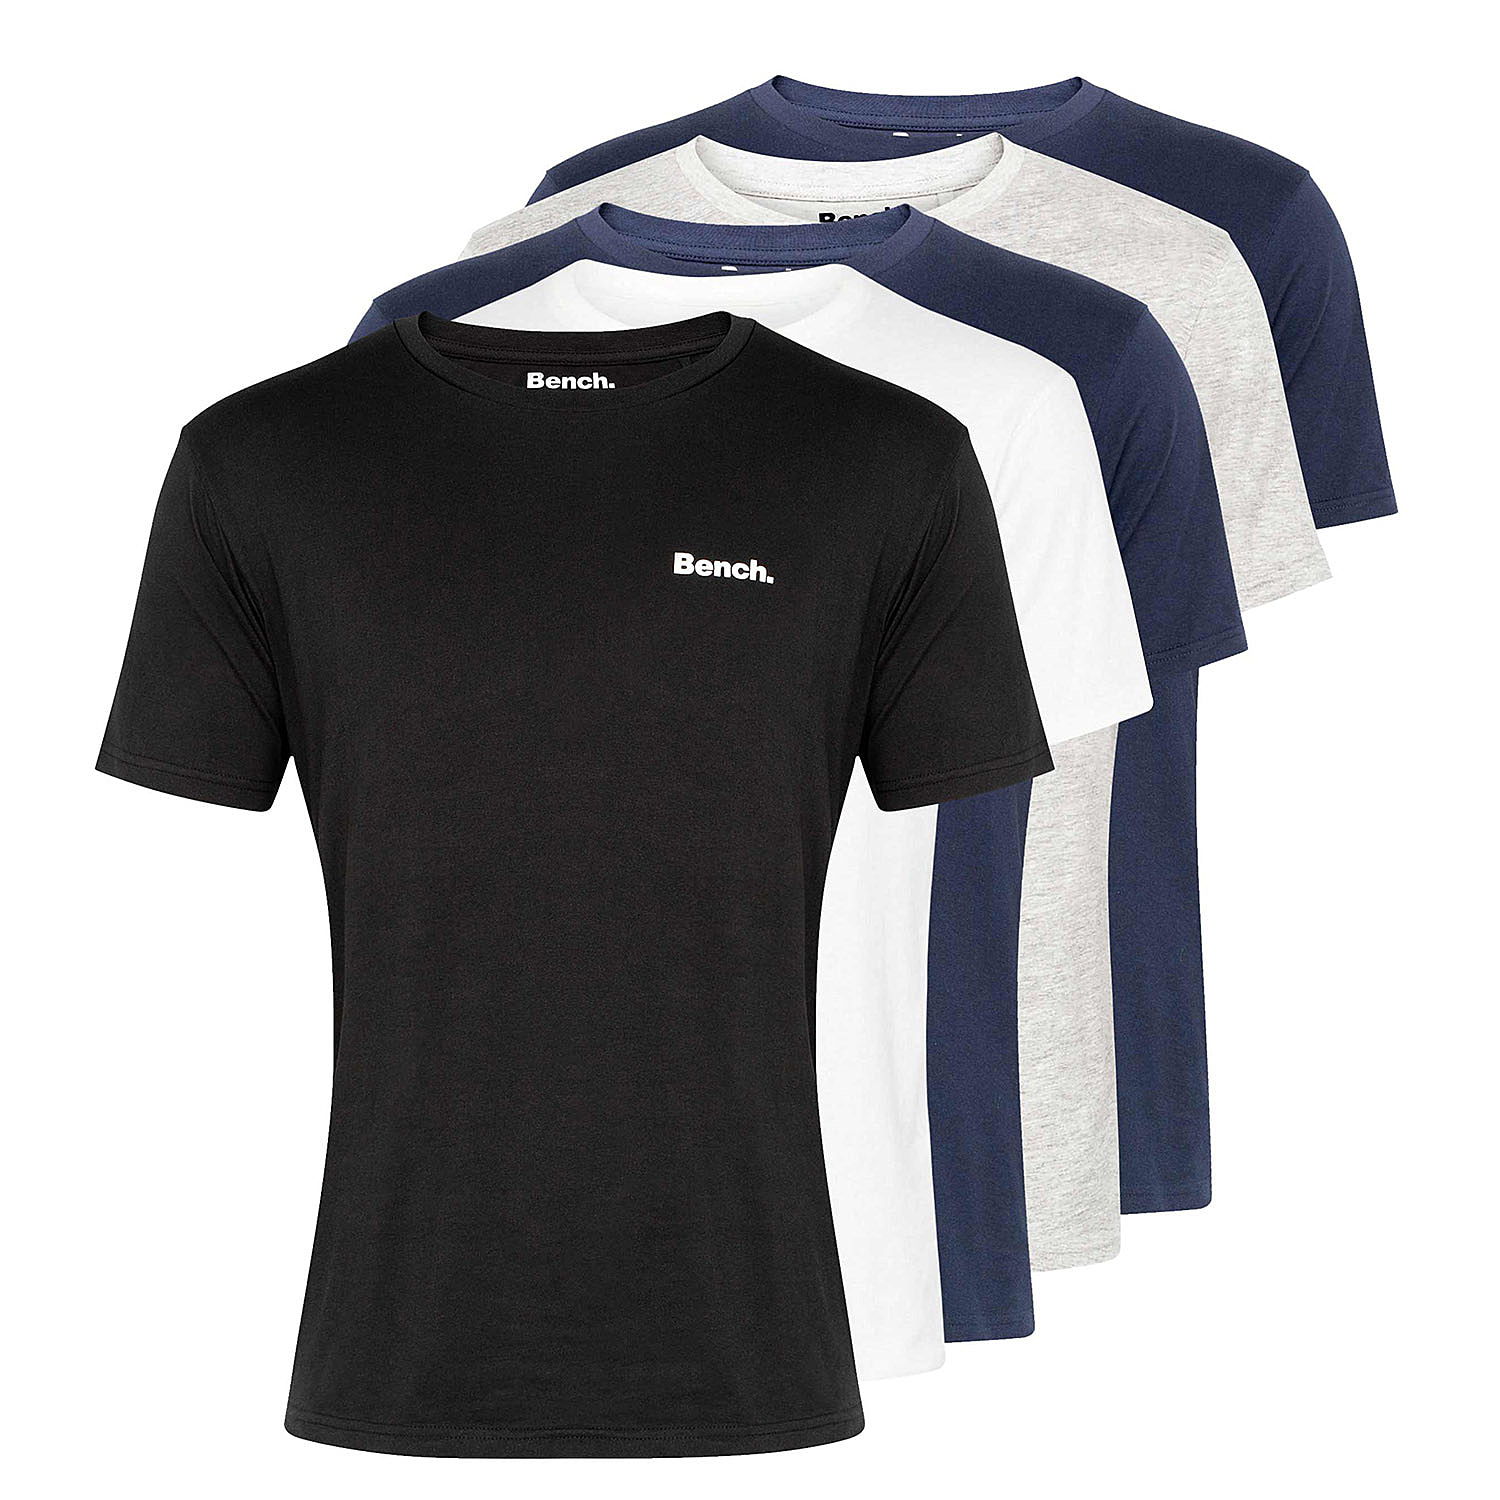 5 Pack Bench T Shirt with Free Socks (Size - M) - White, Black, Grey and 2x Navy